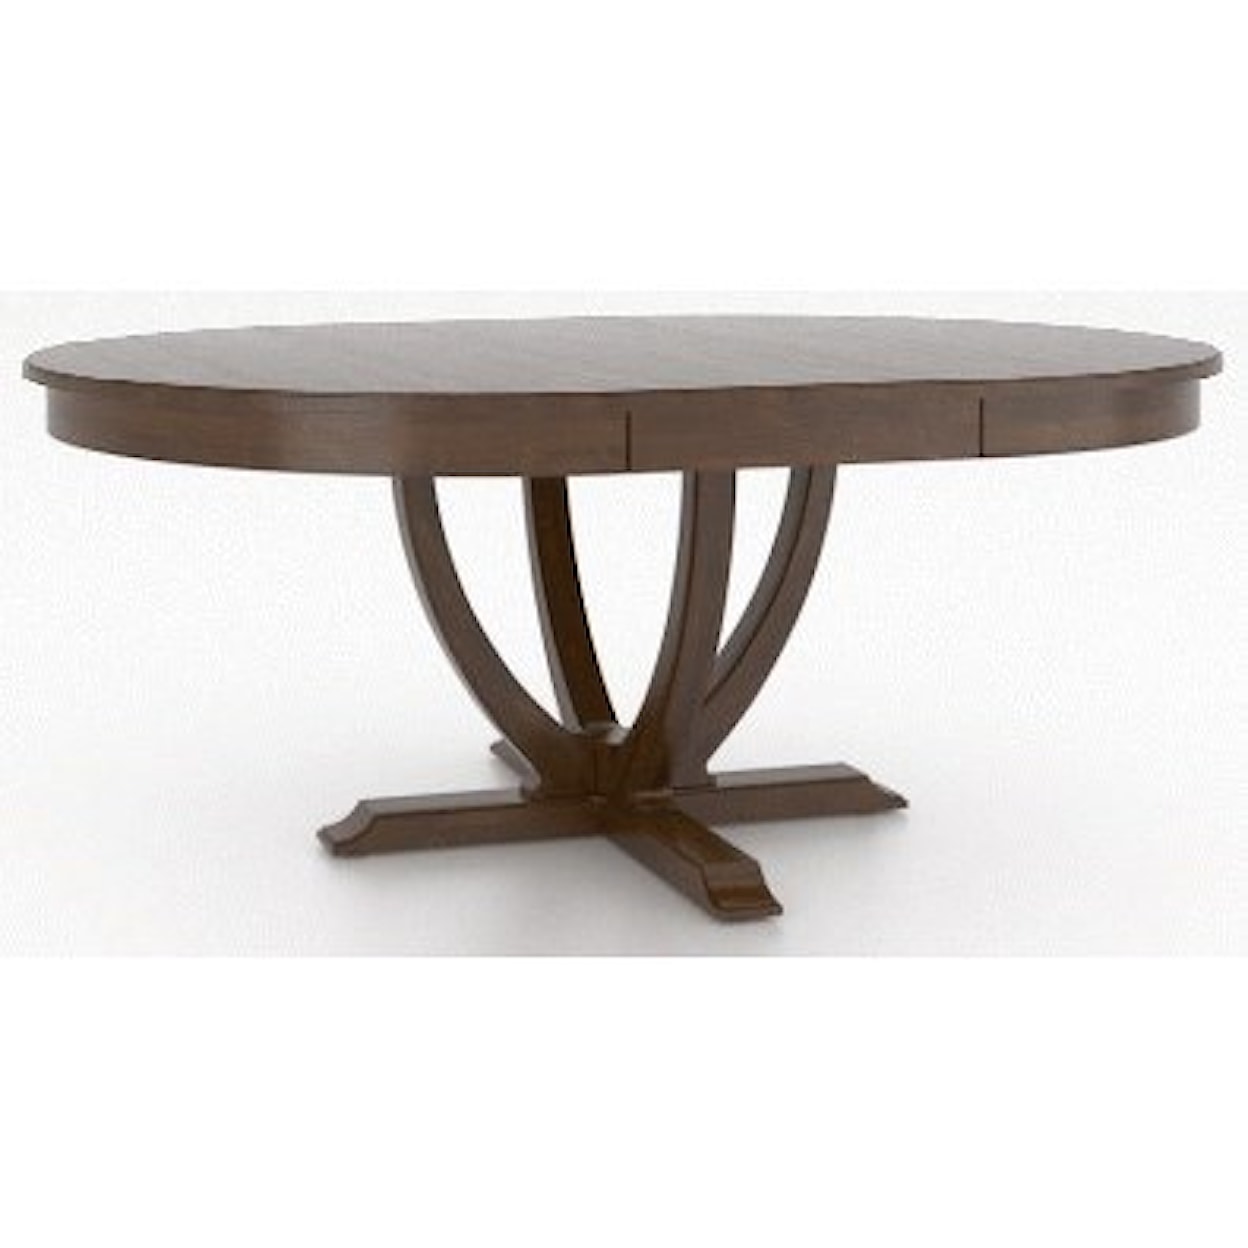 Canadel Canadel Customizable Round/Oval Dining Table